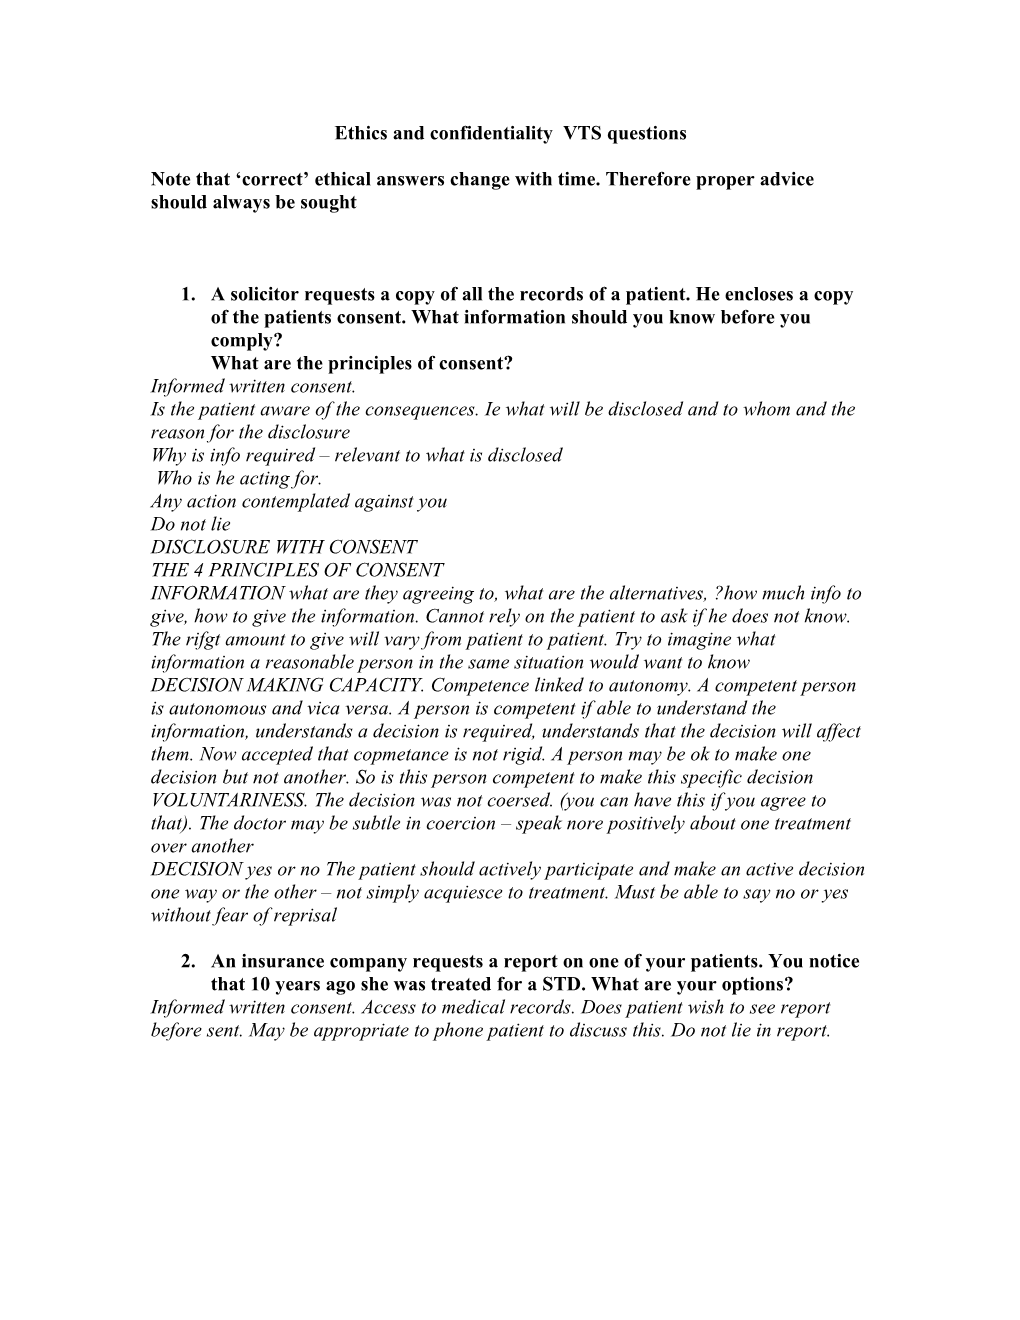 Ethics and Confidentiality VTS Questions